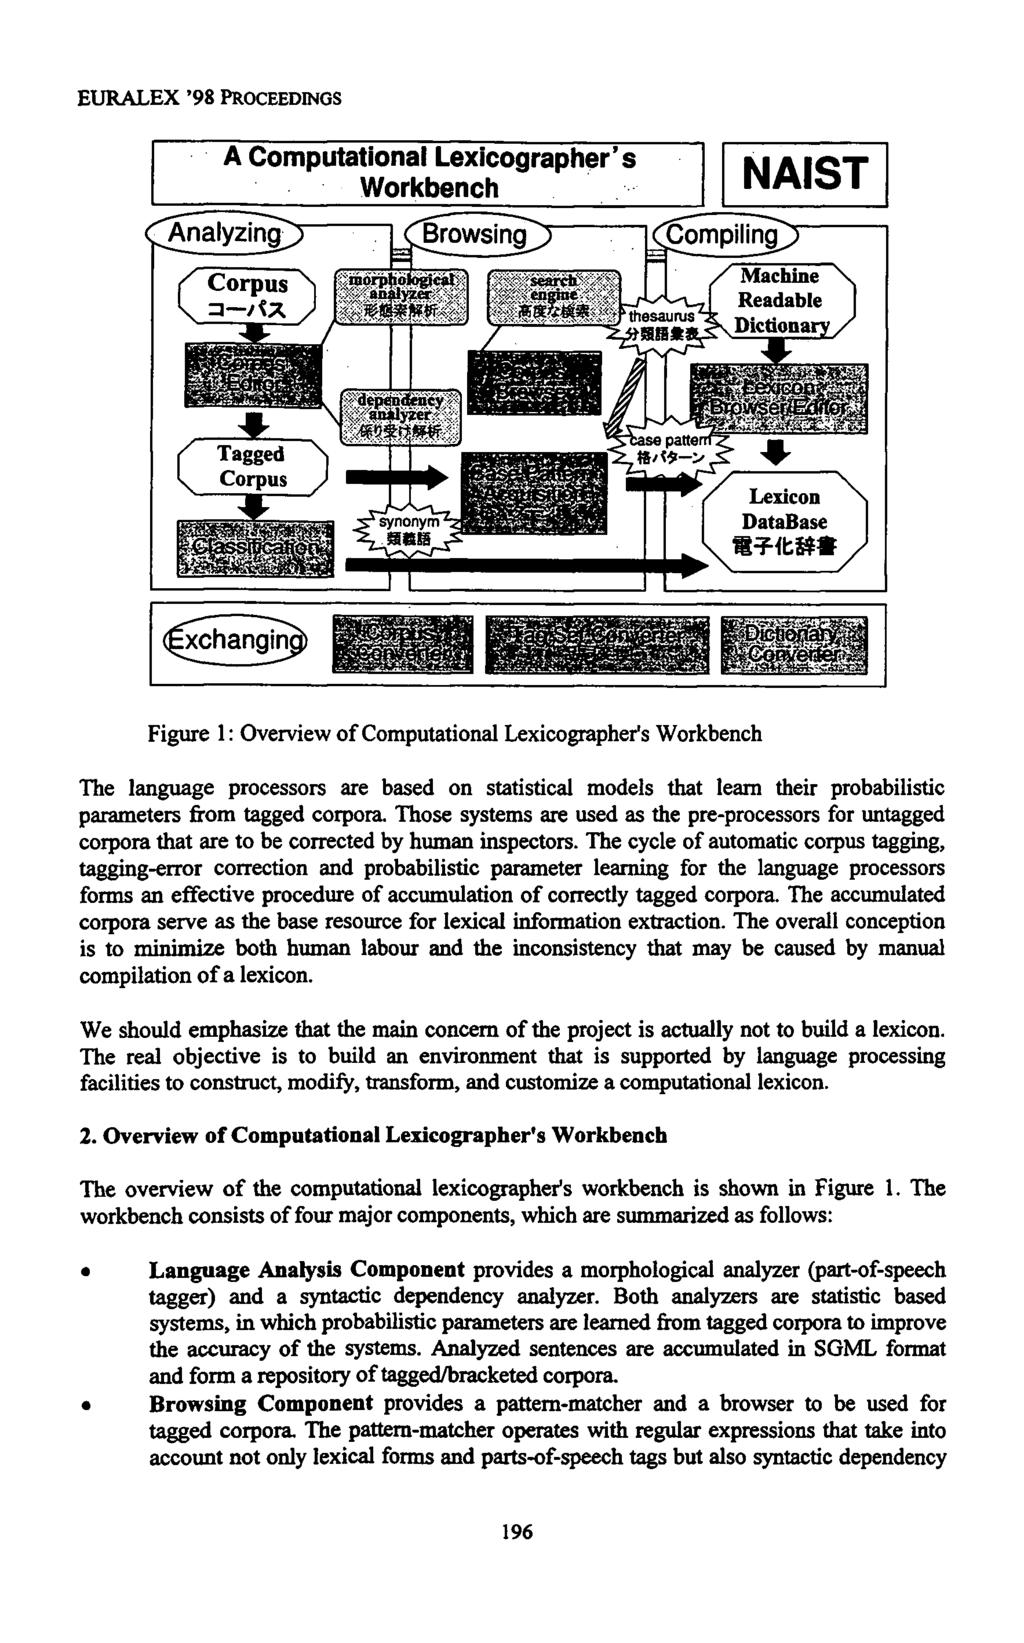 EURALEX '98 PROCEEDINGS Figure 1: Overview of Computational Lexicographer's Workbench The language processors are based on statistical models that learn their probabilistic parameters from tagged